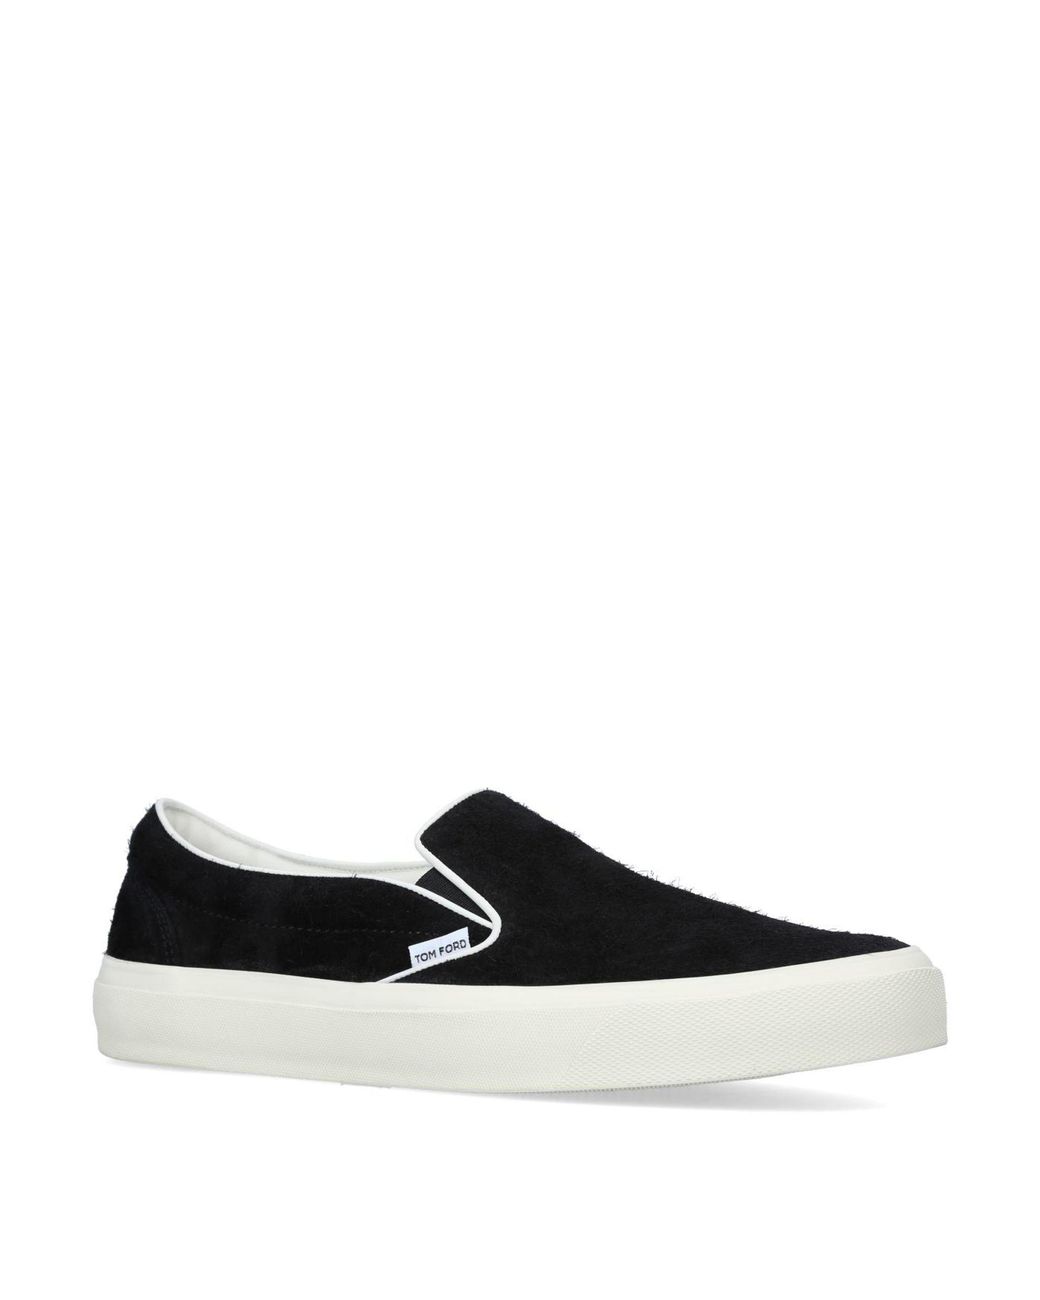 Tom Ford Suede Cambridge Slip-on Sneakers in Black for Men - Lyst